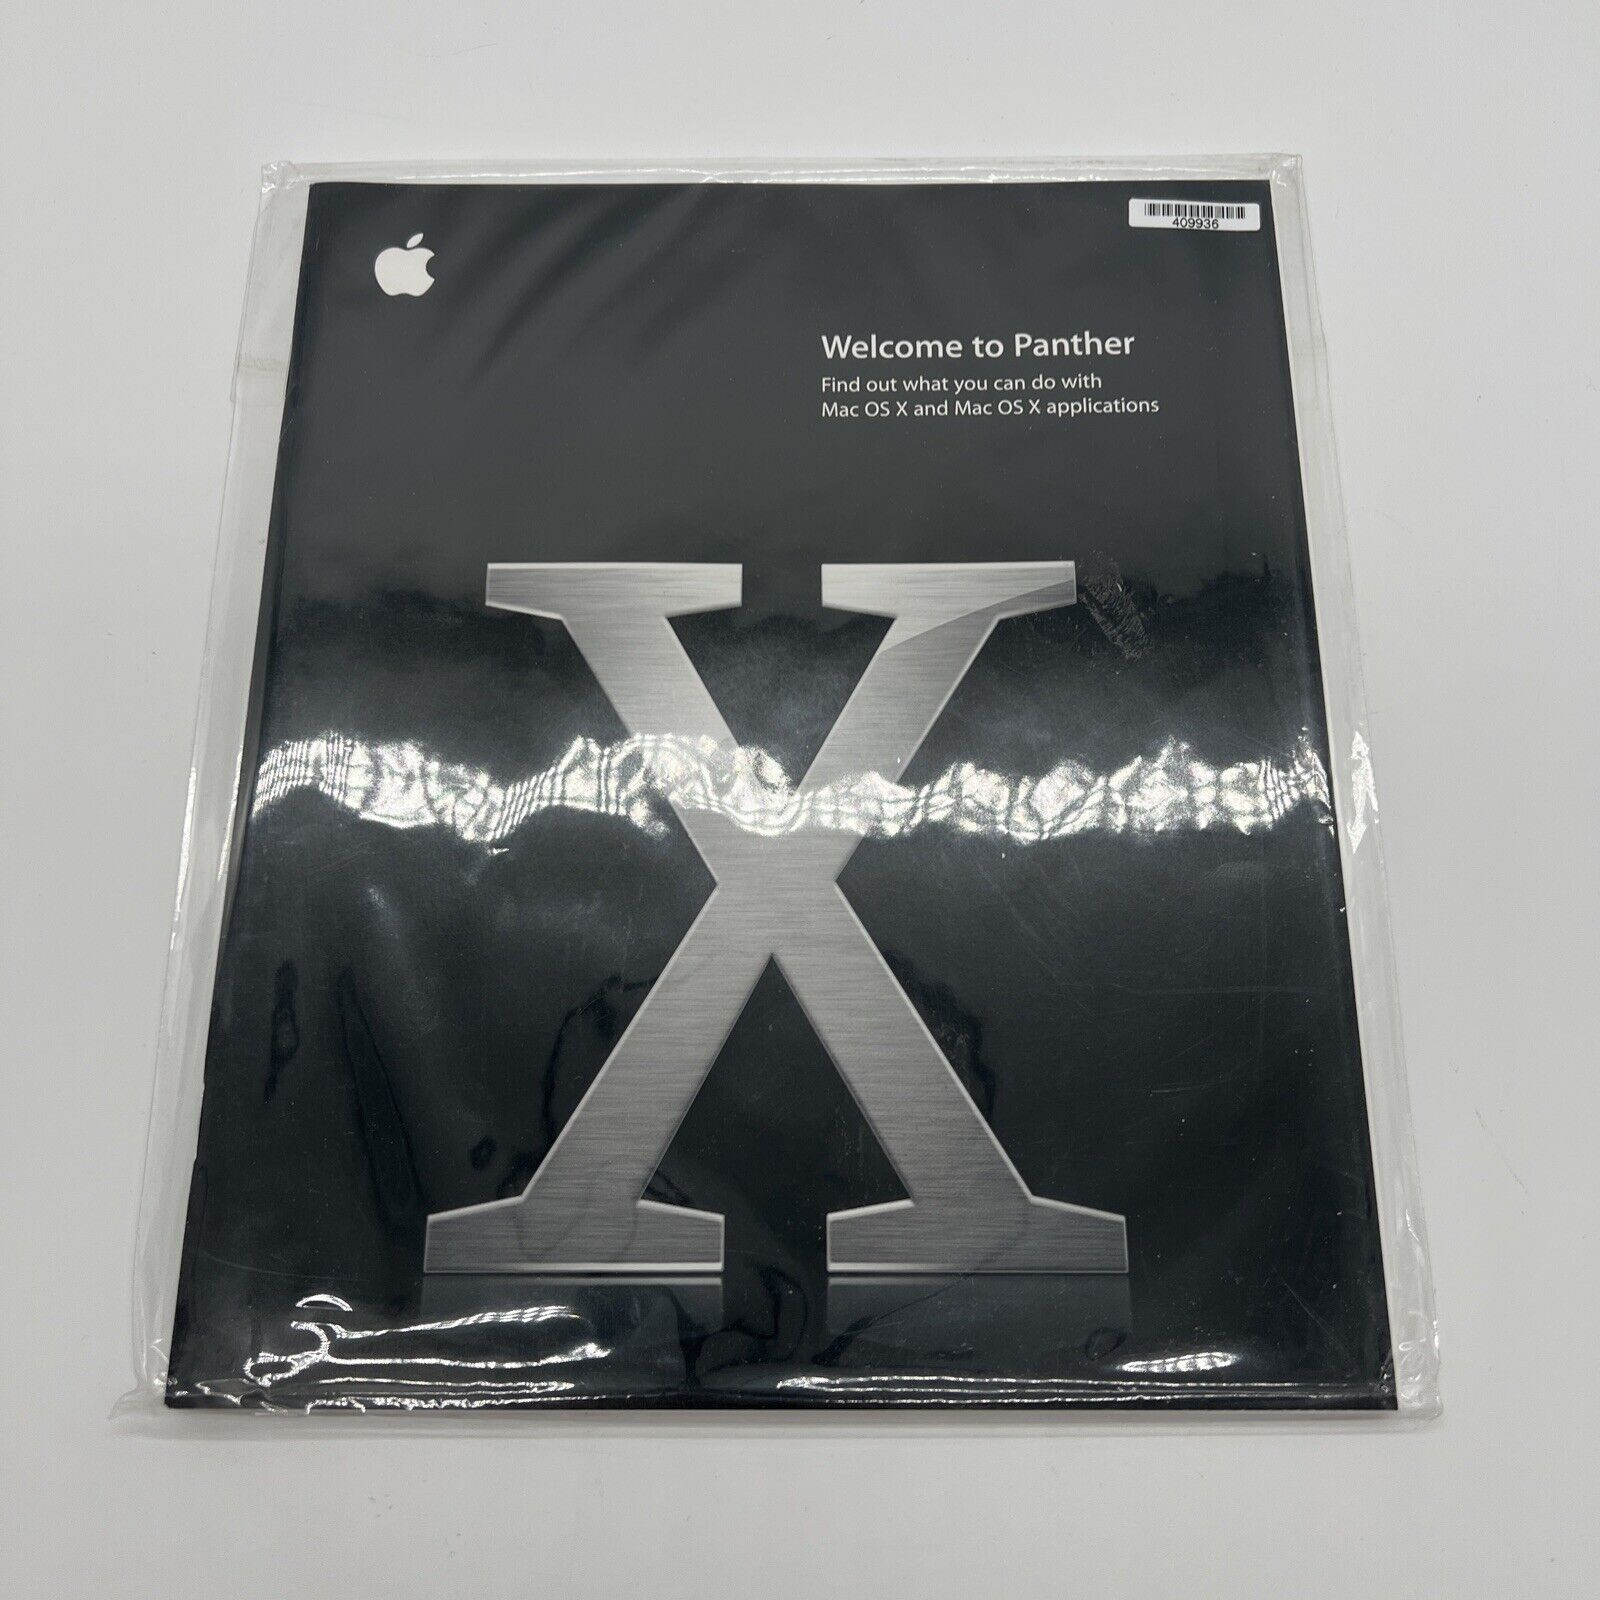 Apple “Welcome To Panther” macOS X Panther User Manual